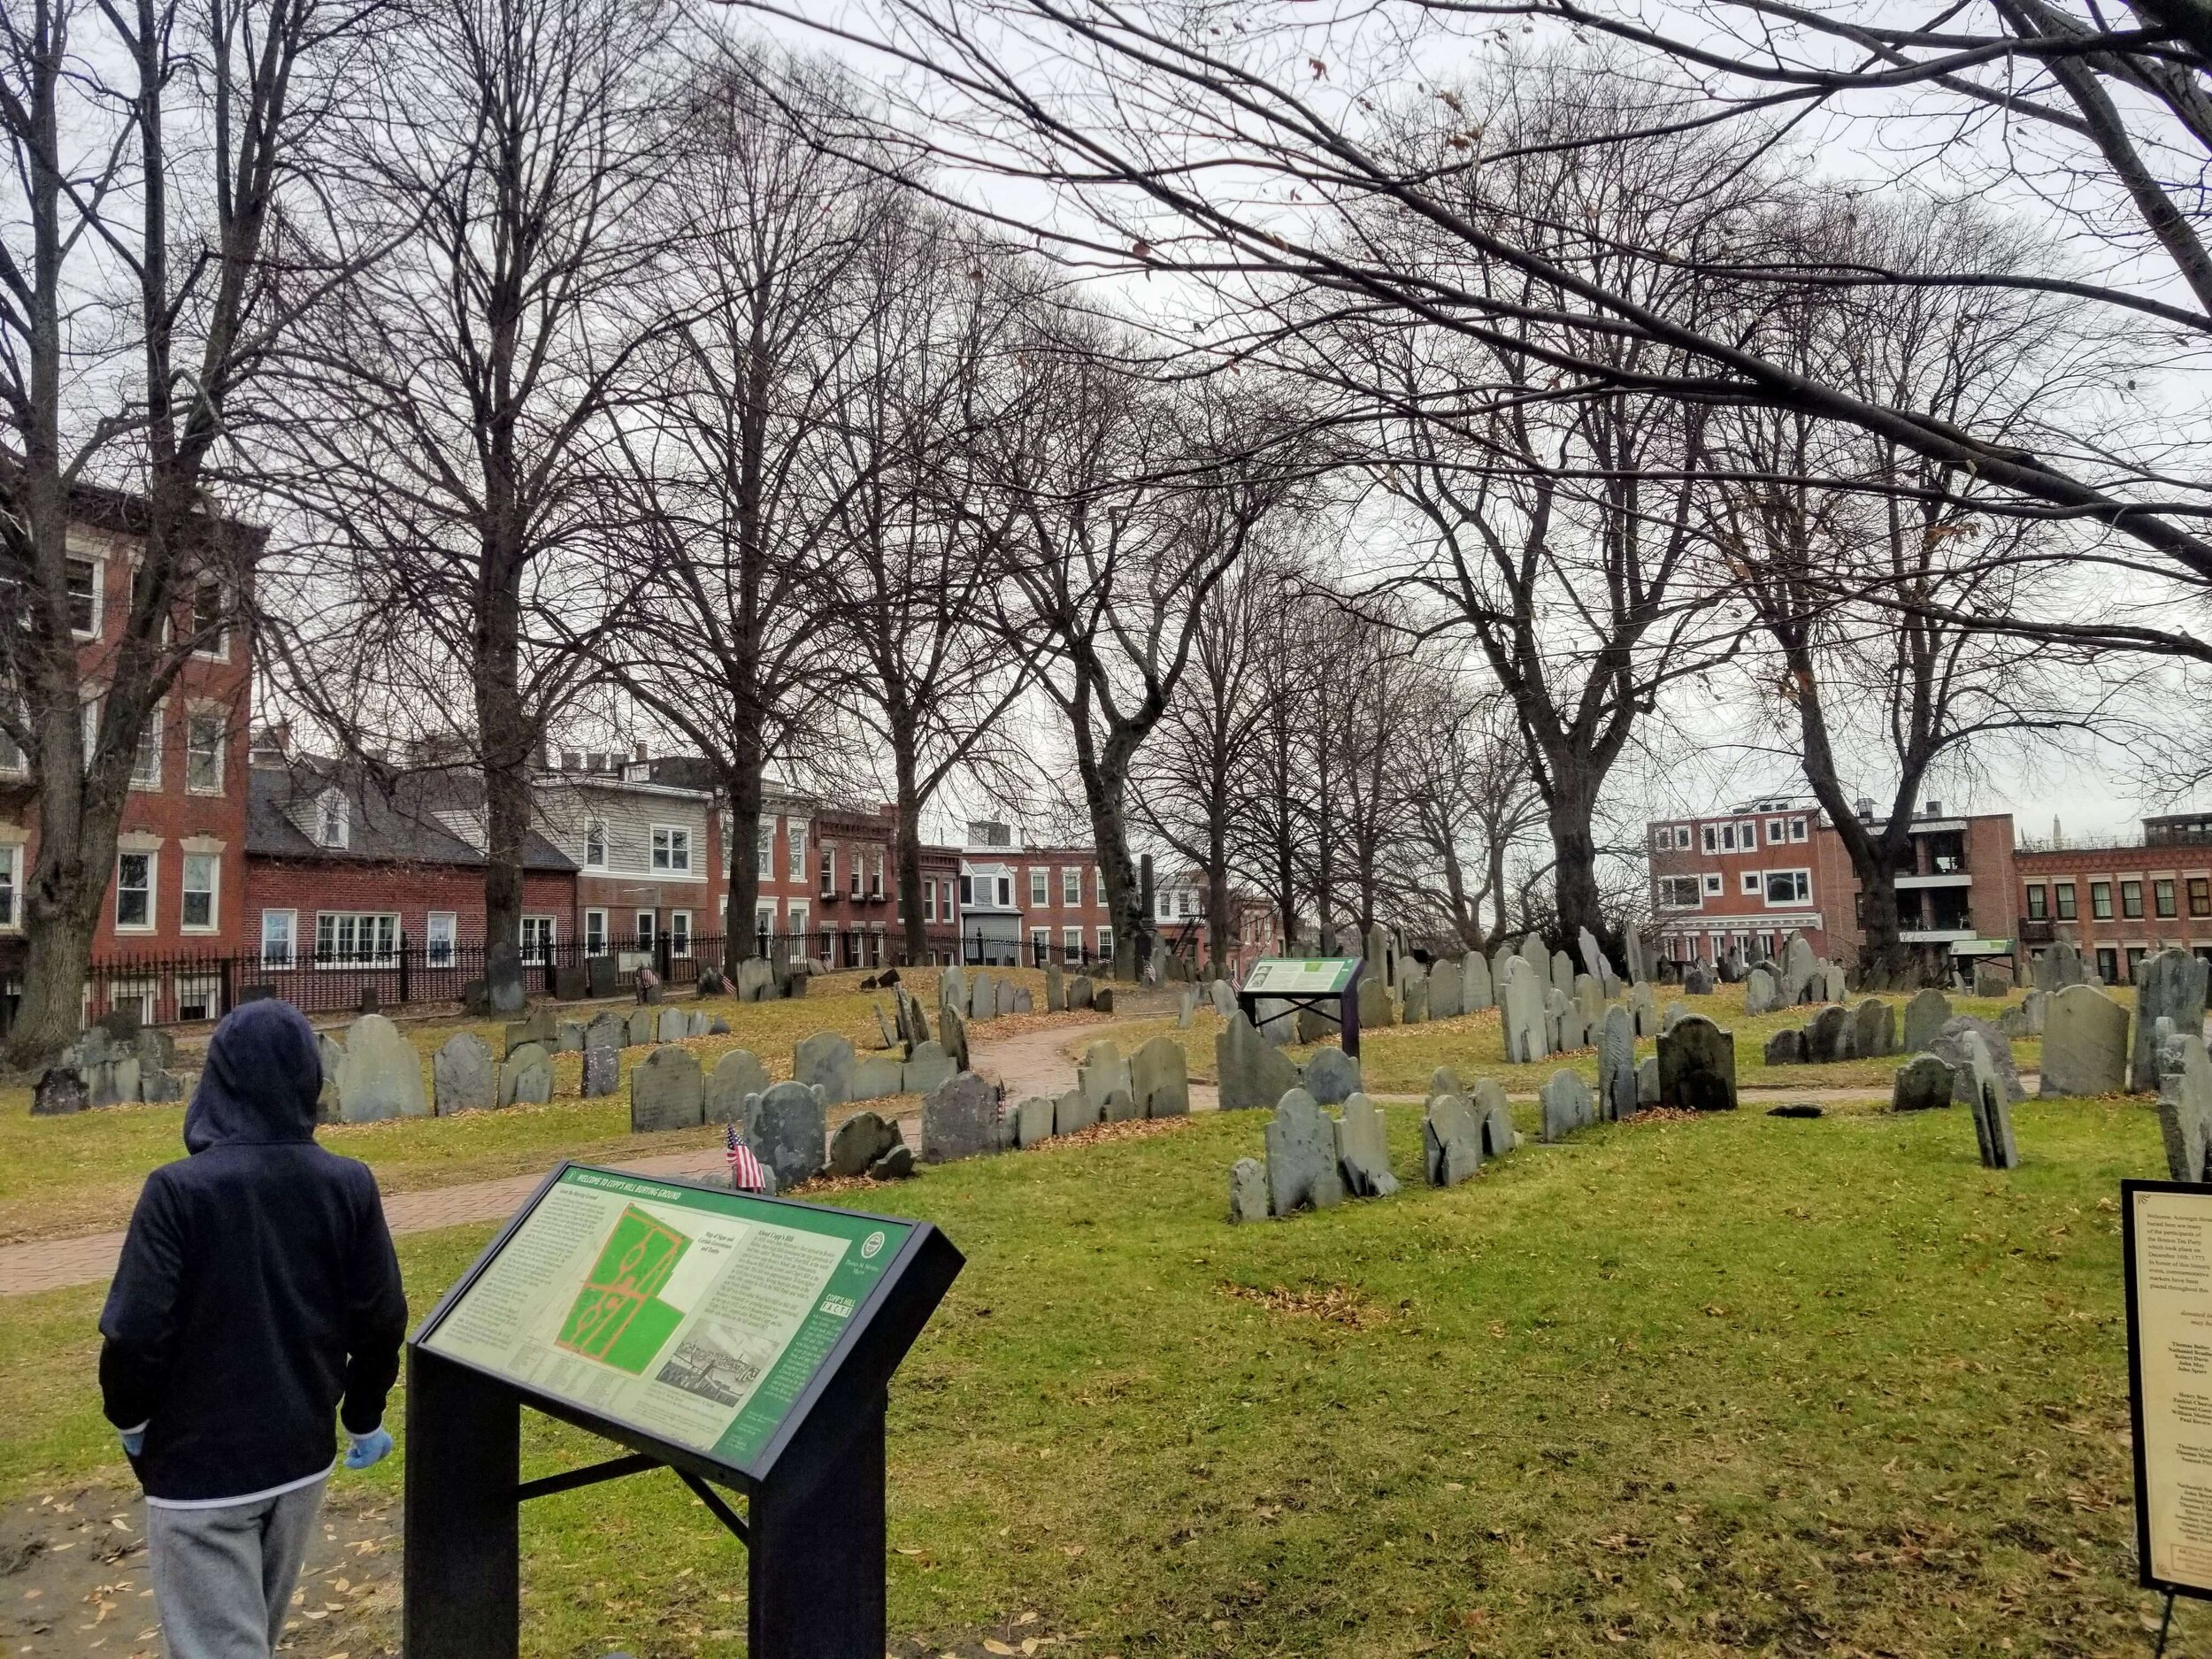  Copp's Hill Burying Ground where many Tea Party participants and other revolutionaries are buried 